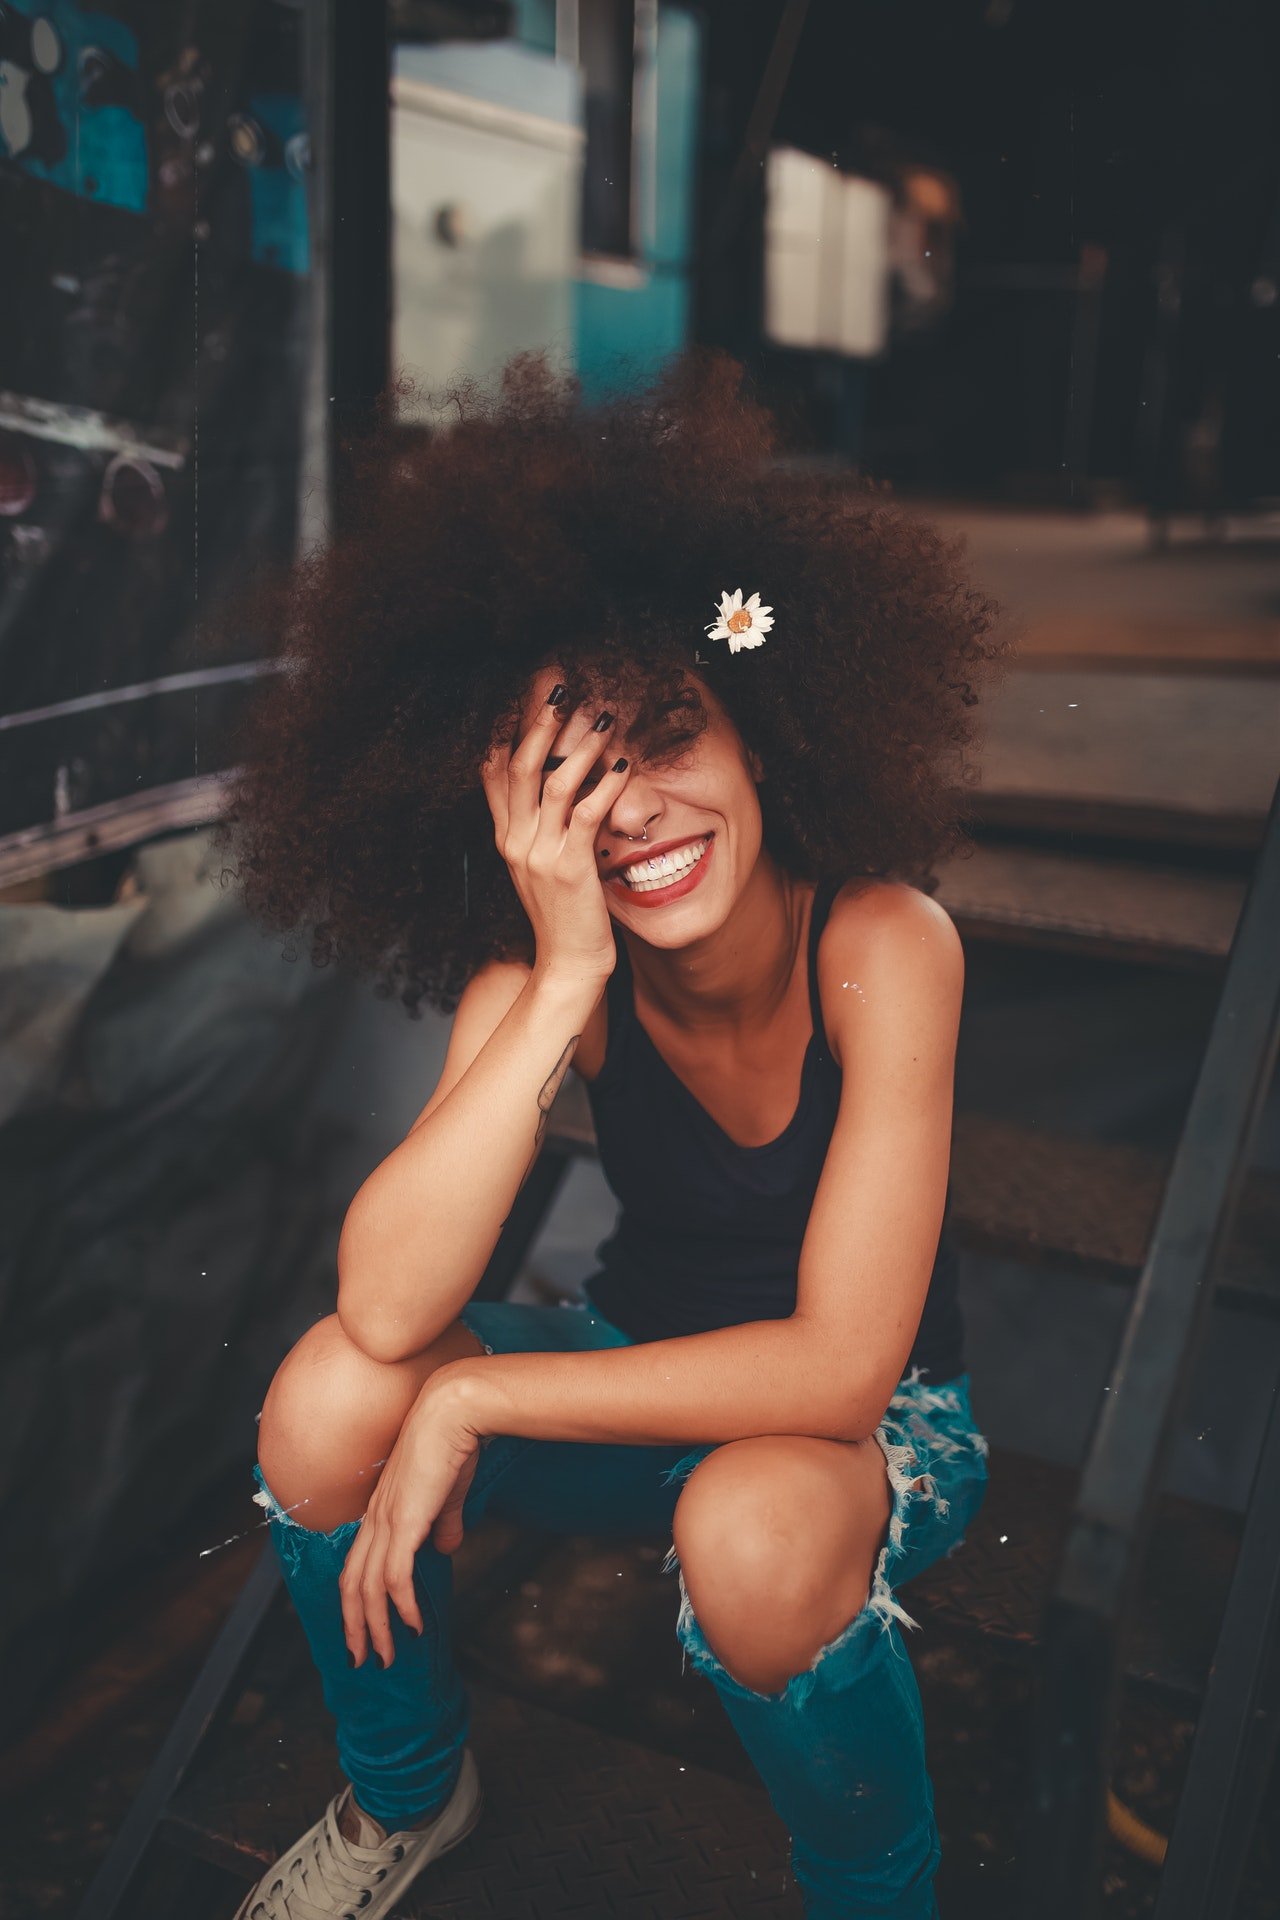 She couldn't believe her small action had inspired such kindness and felt even more wonderful about it. | Source: Pexels